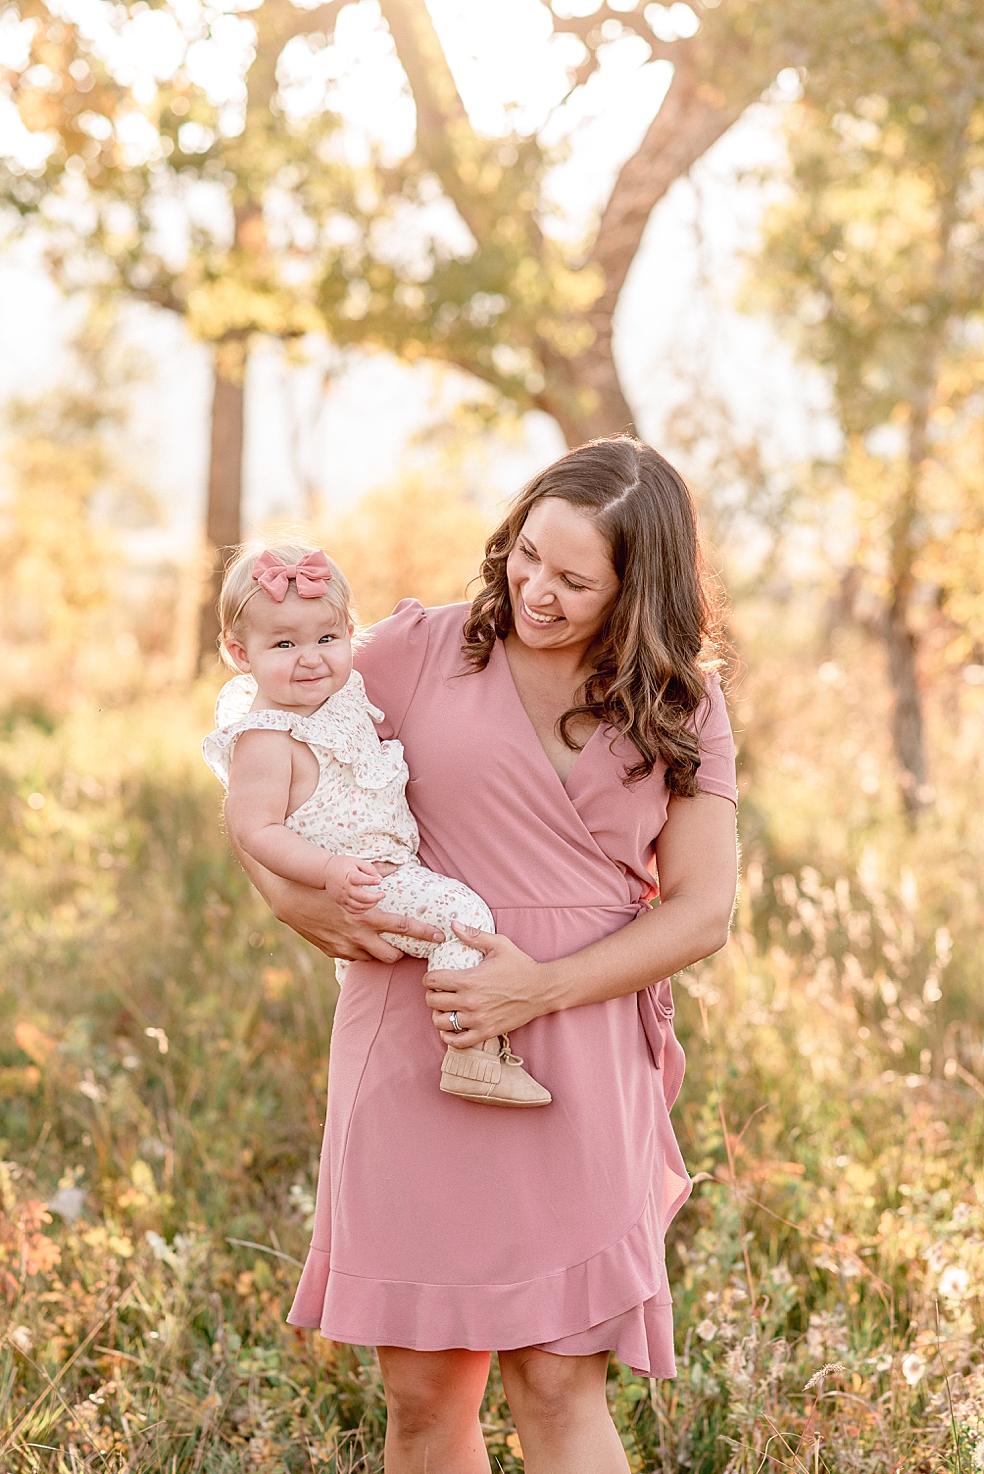 Mom in pink dress smiling and holding baby girl | Photo by Jessica Lee Photography